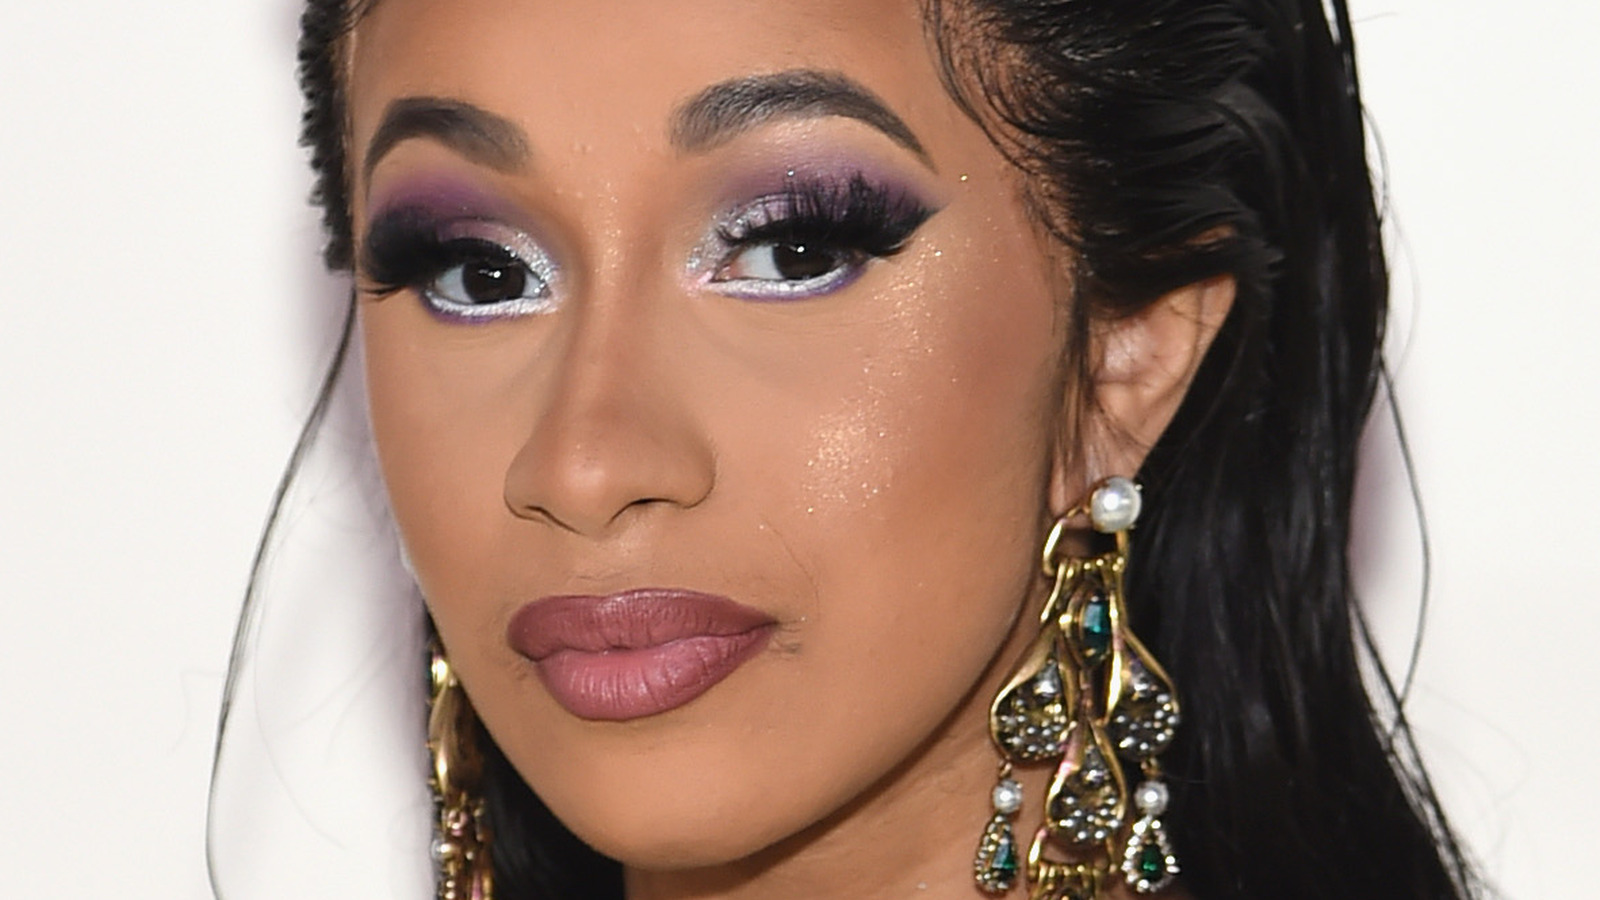 Here's What Cardi B Almost Got Tattooed On Her Face